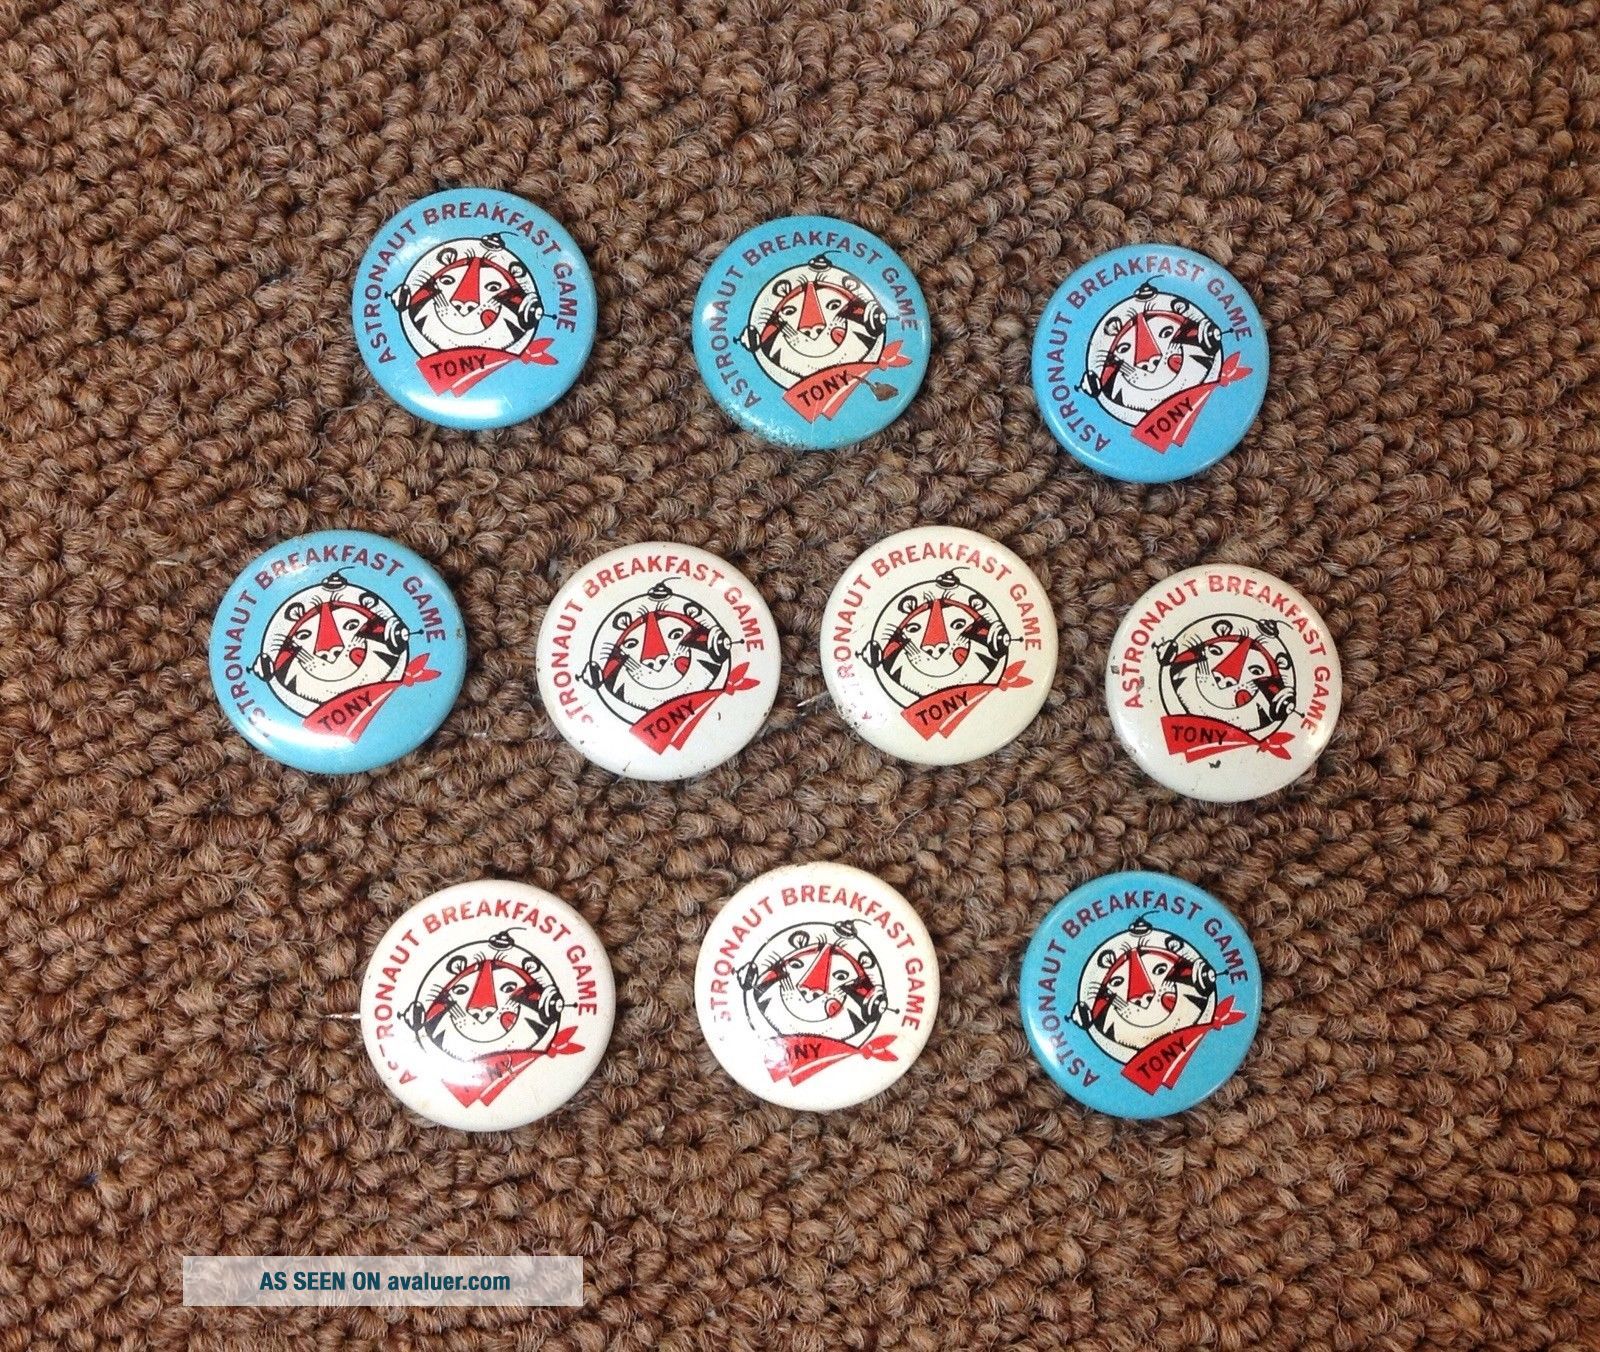 Tony The Tiger Astronaut Breakfast Game Pins Qty 10 Vintage 1960 ' s